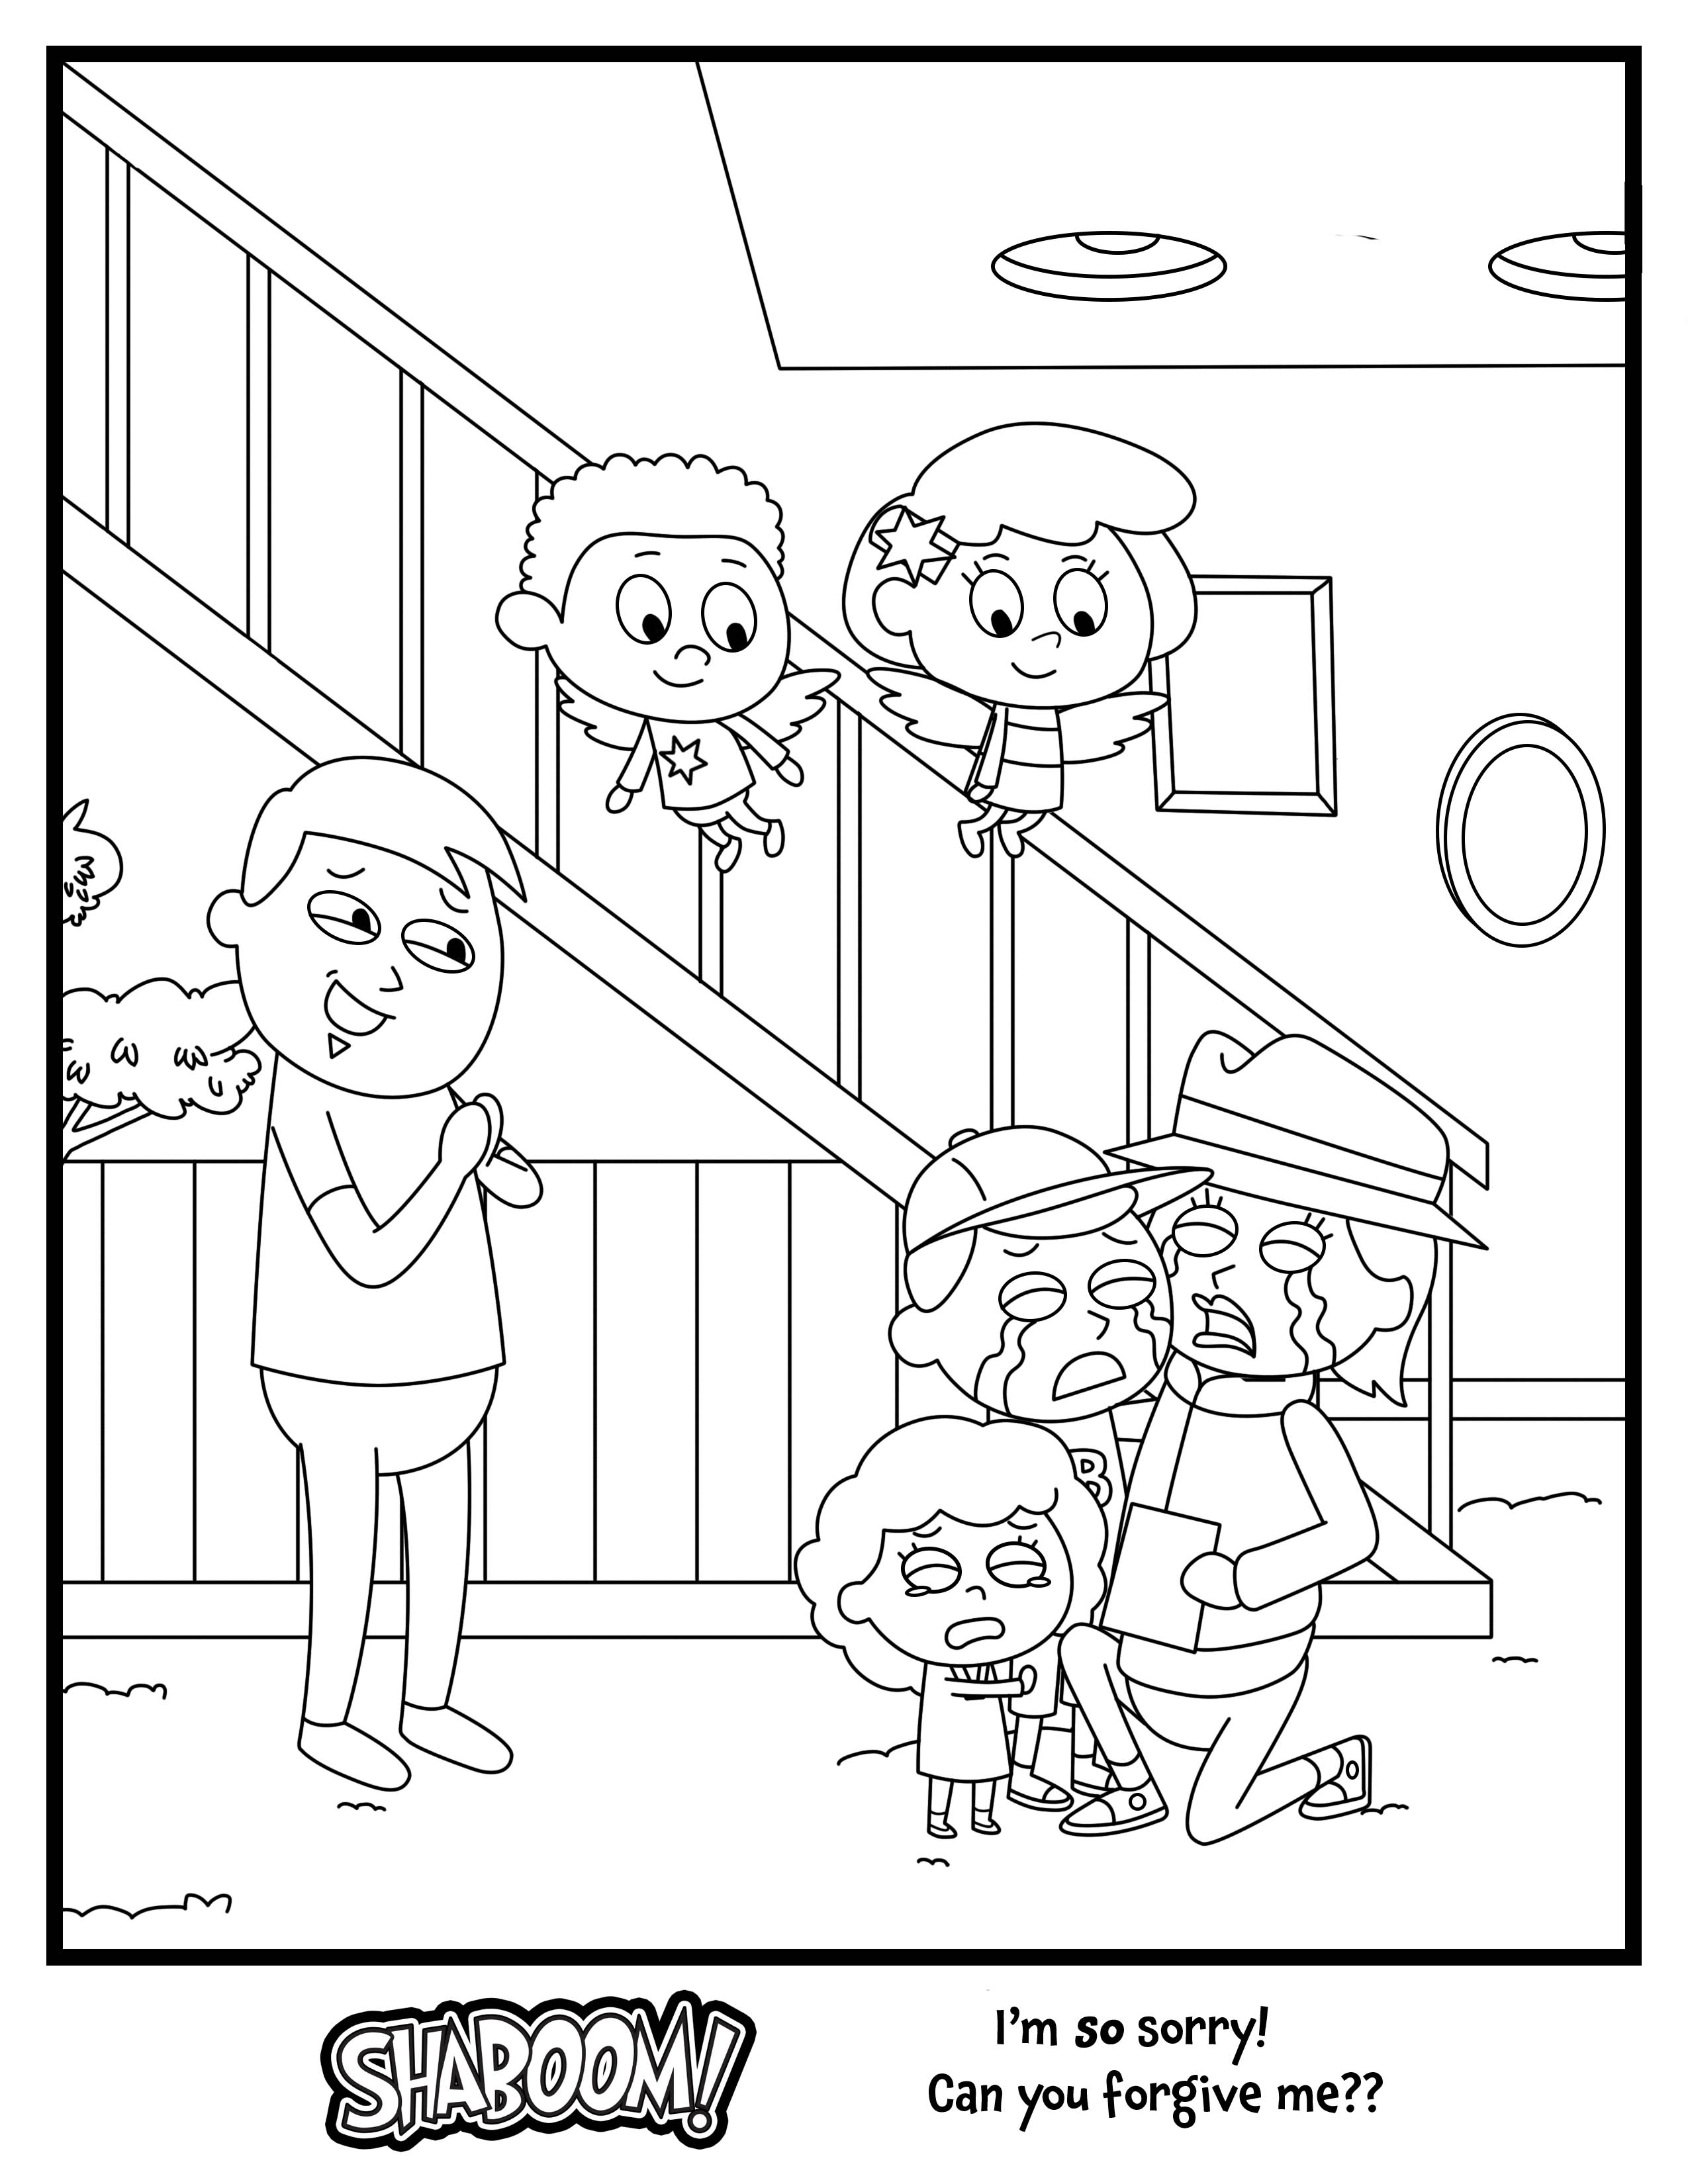 panda saying im sorry coloring pages - photo #11